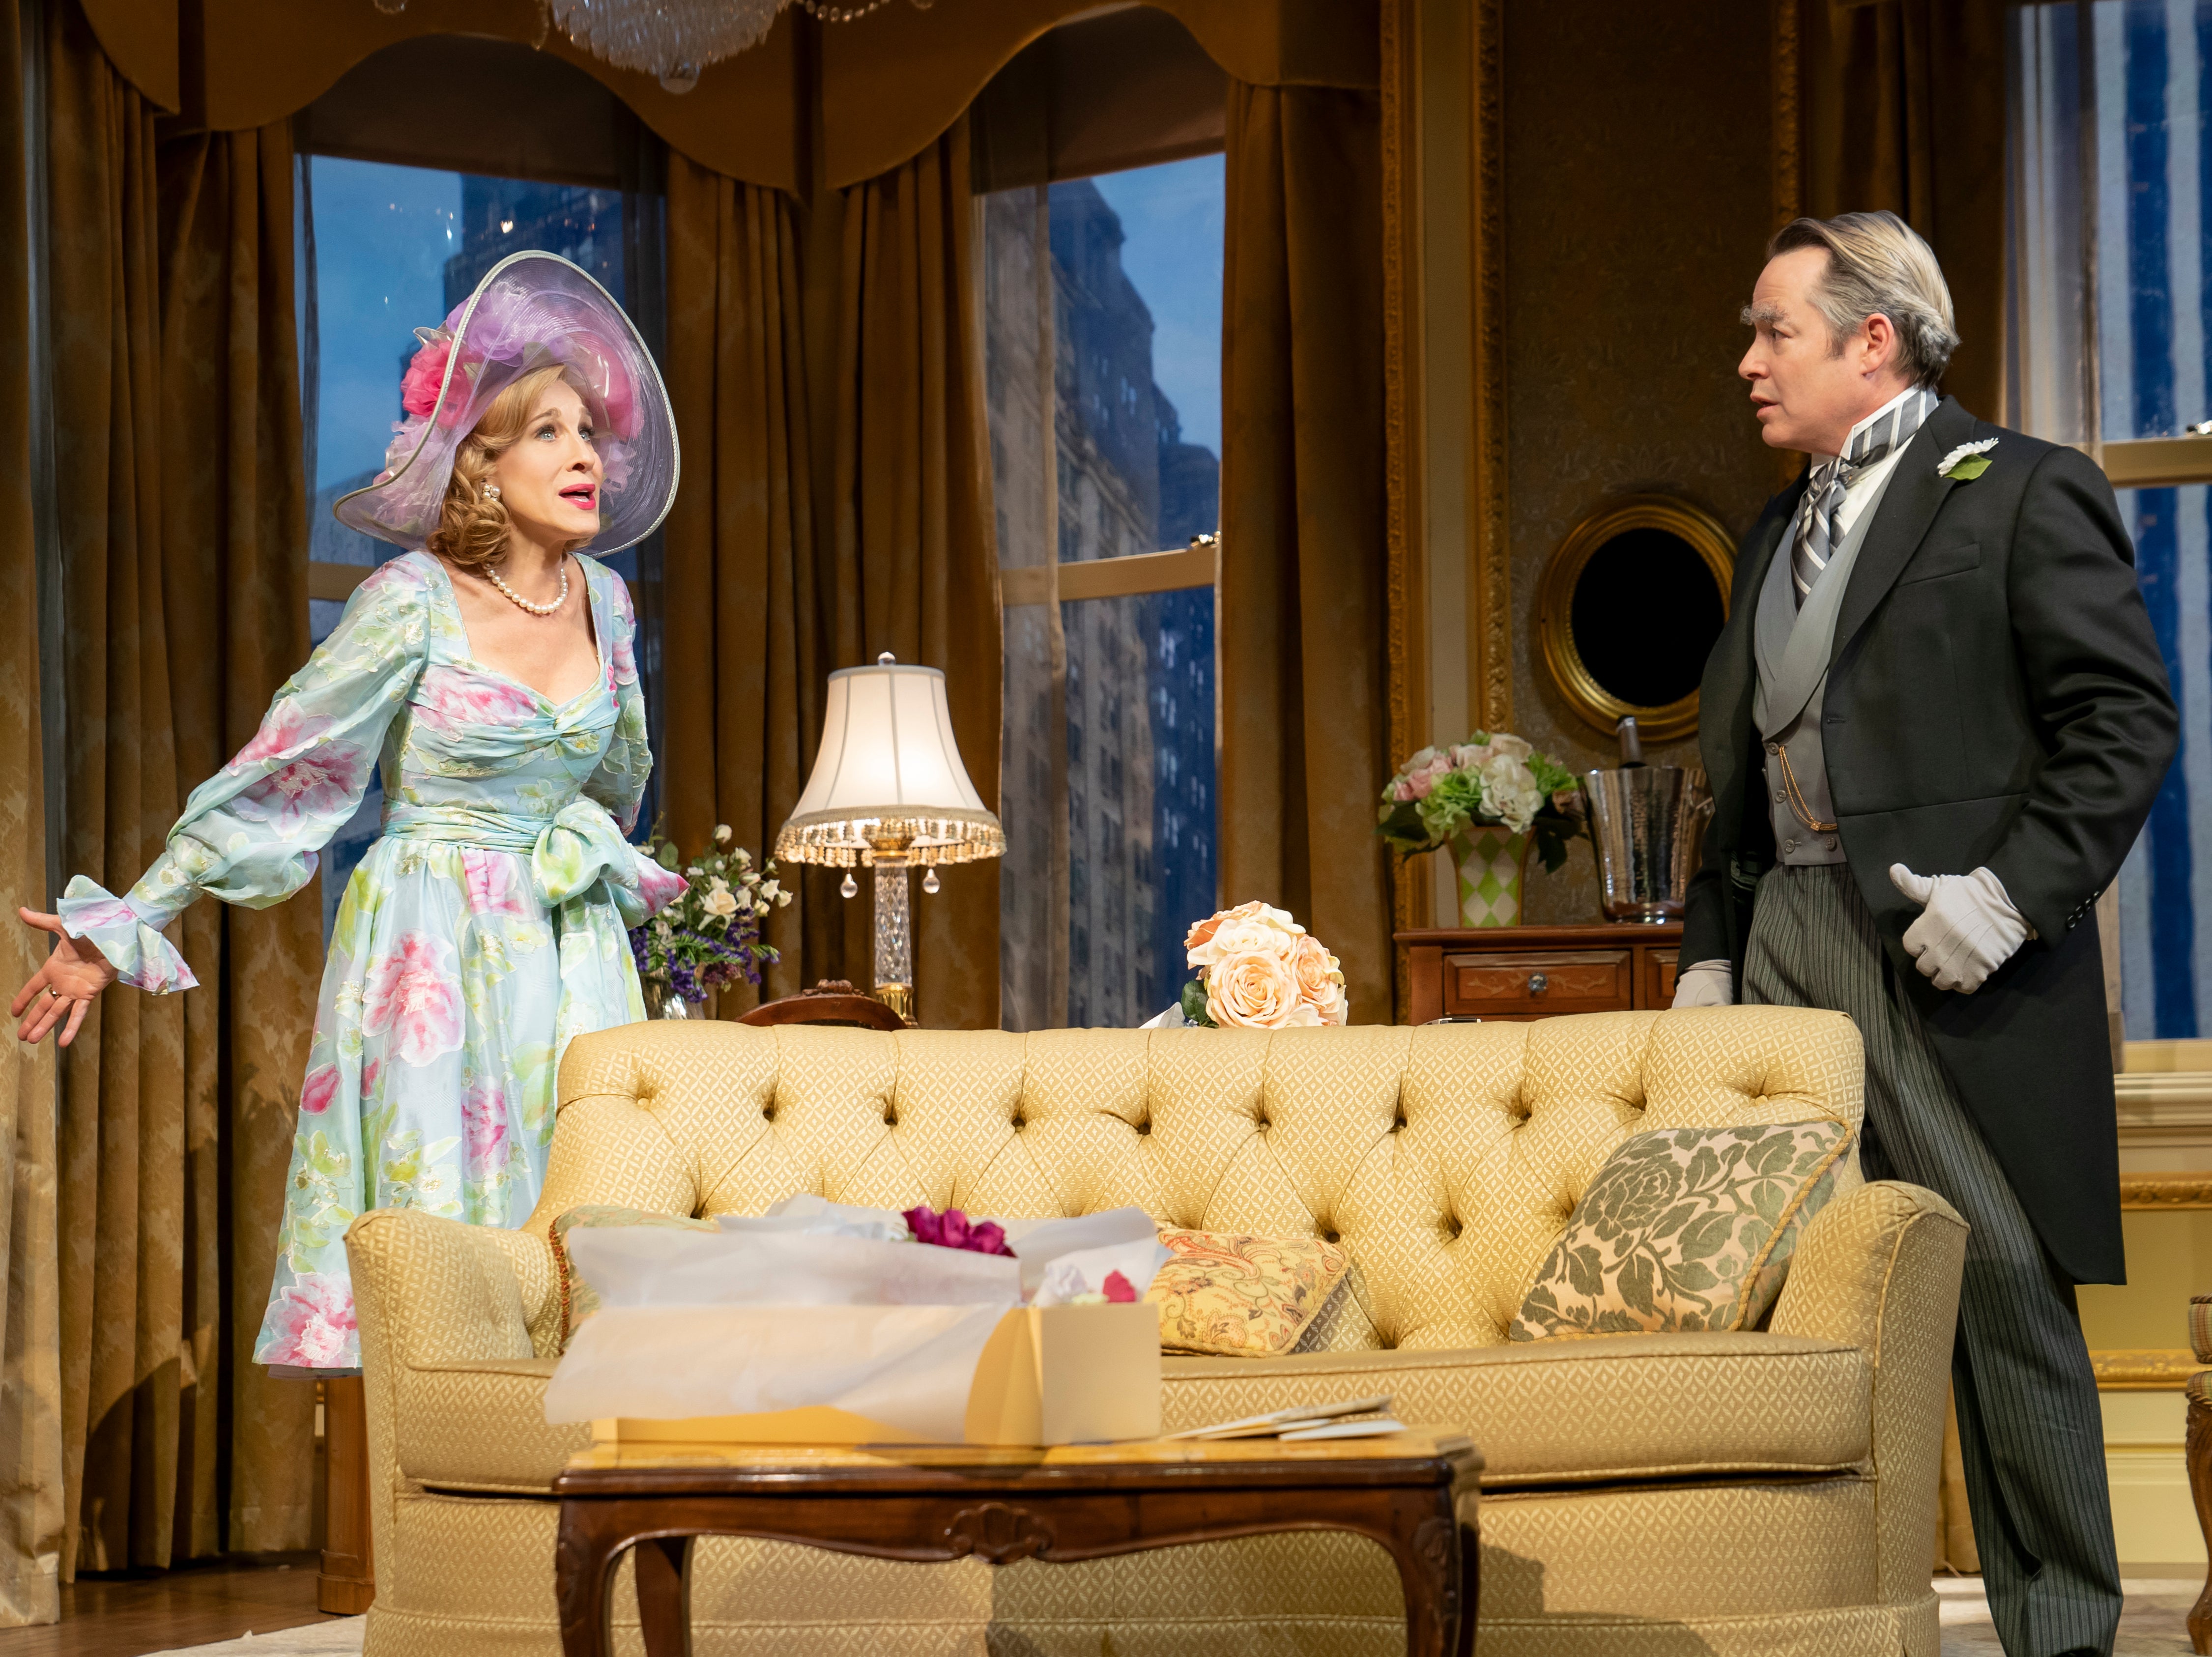 Sarah Jessica Parker and Matthew Broderick in ‘Plaza Suite’ on Broadway